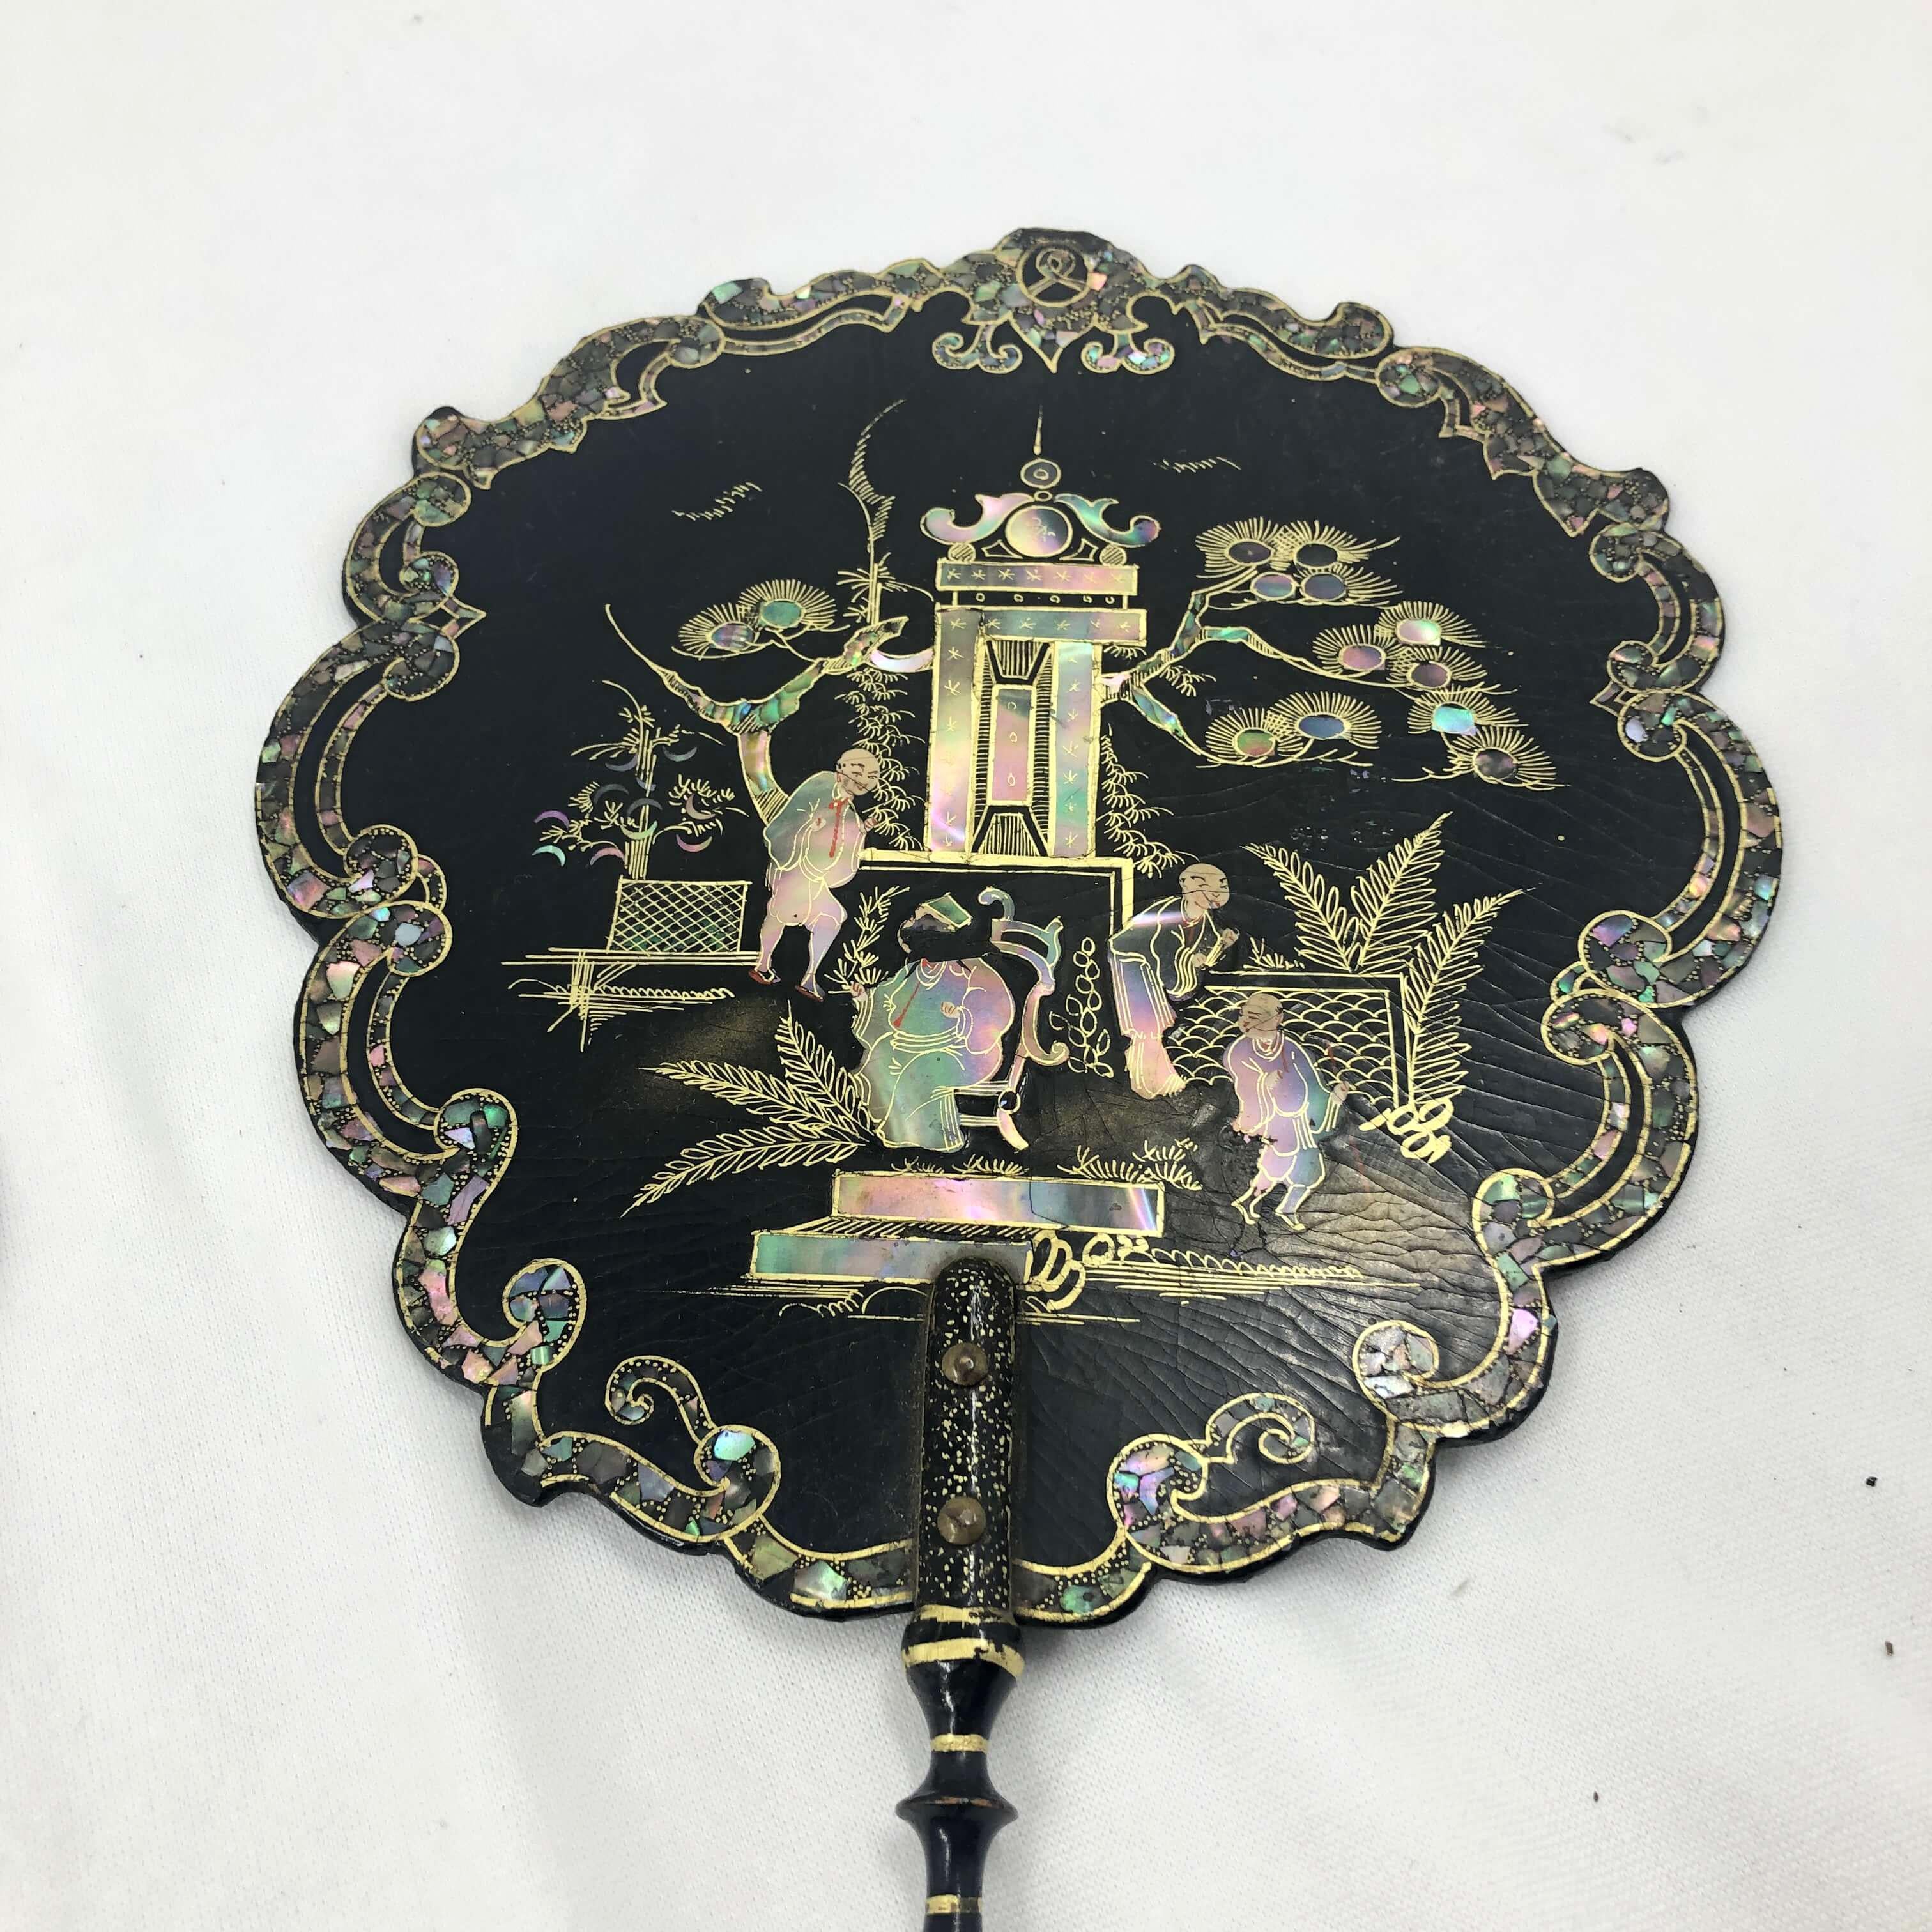 A pair of Victorian mother of pearl inlaid scalloped lacquered and chinoiserie decorated hand held fans with turned handles and gilt decorations.